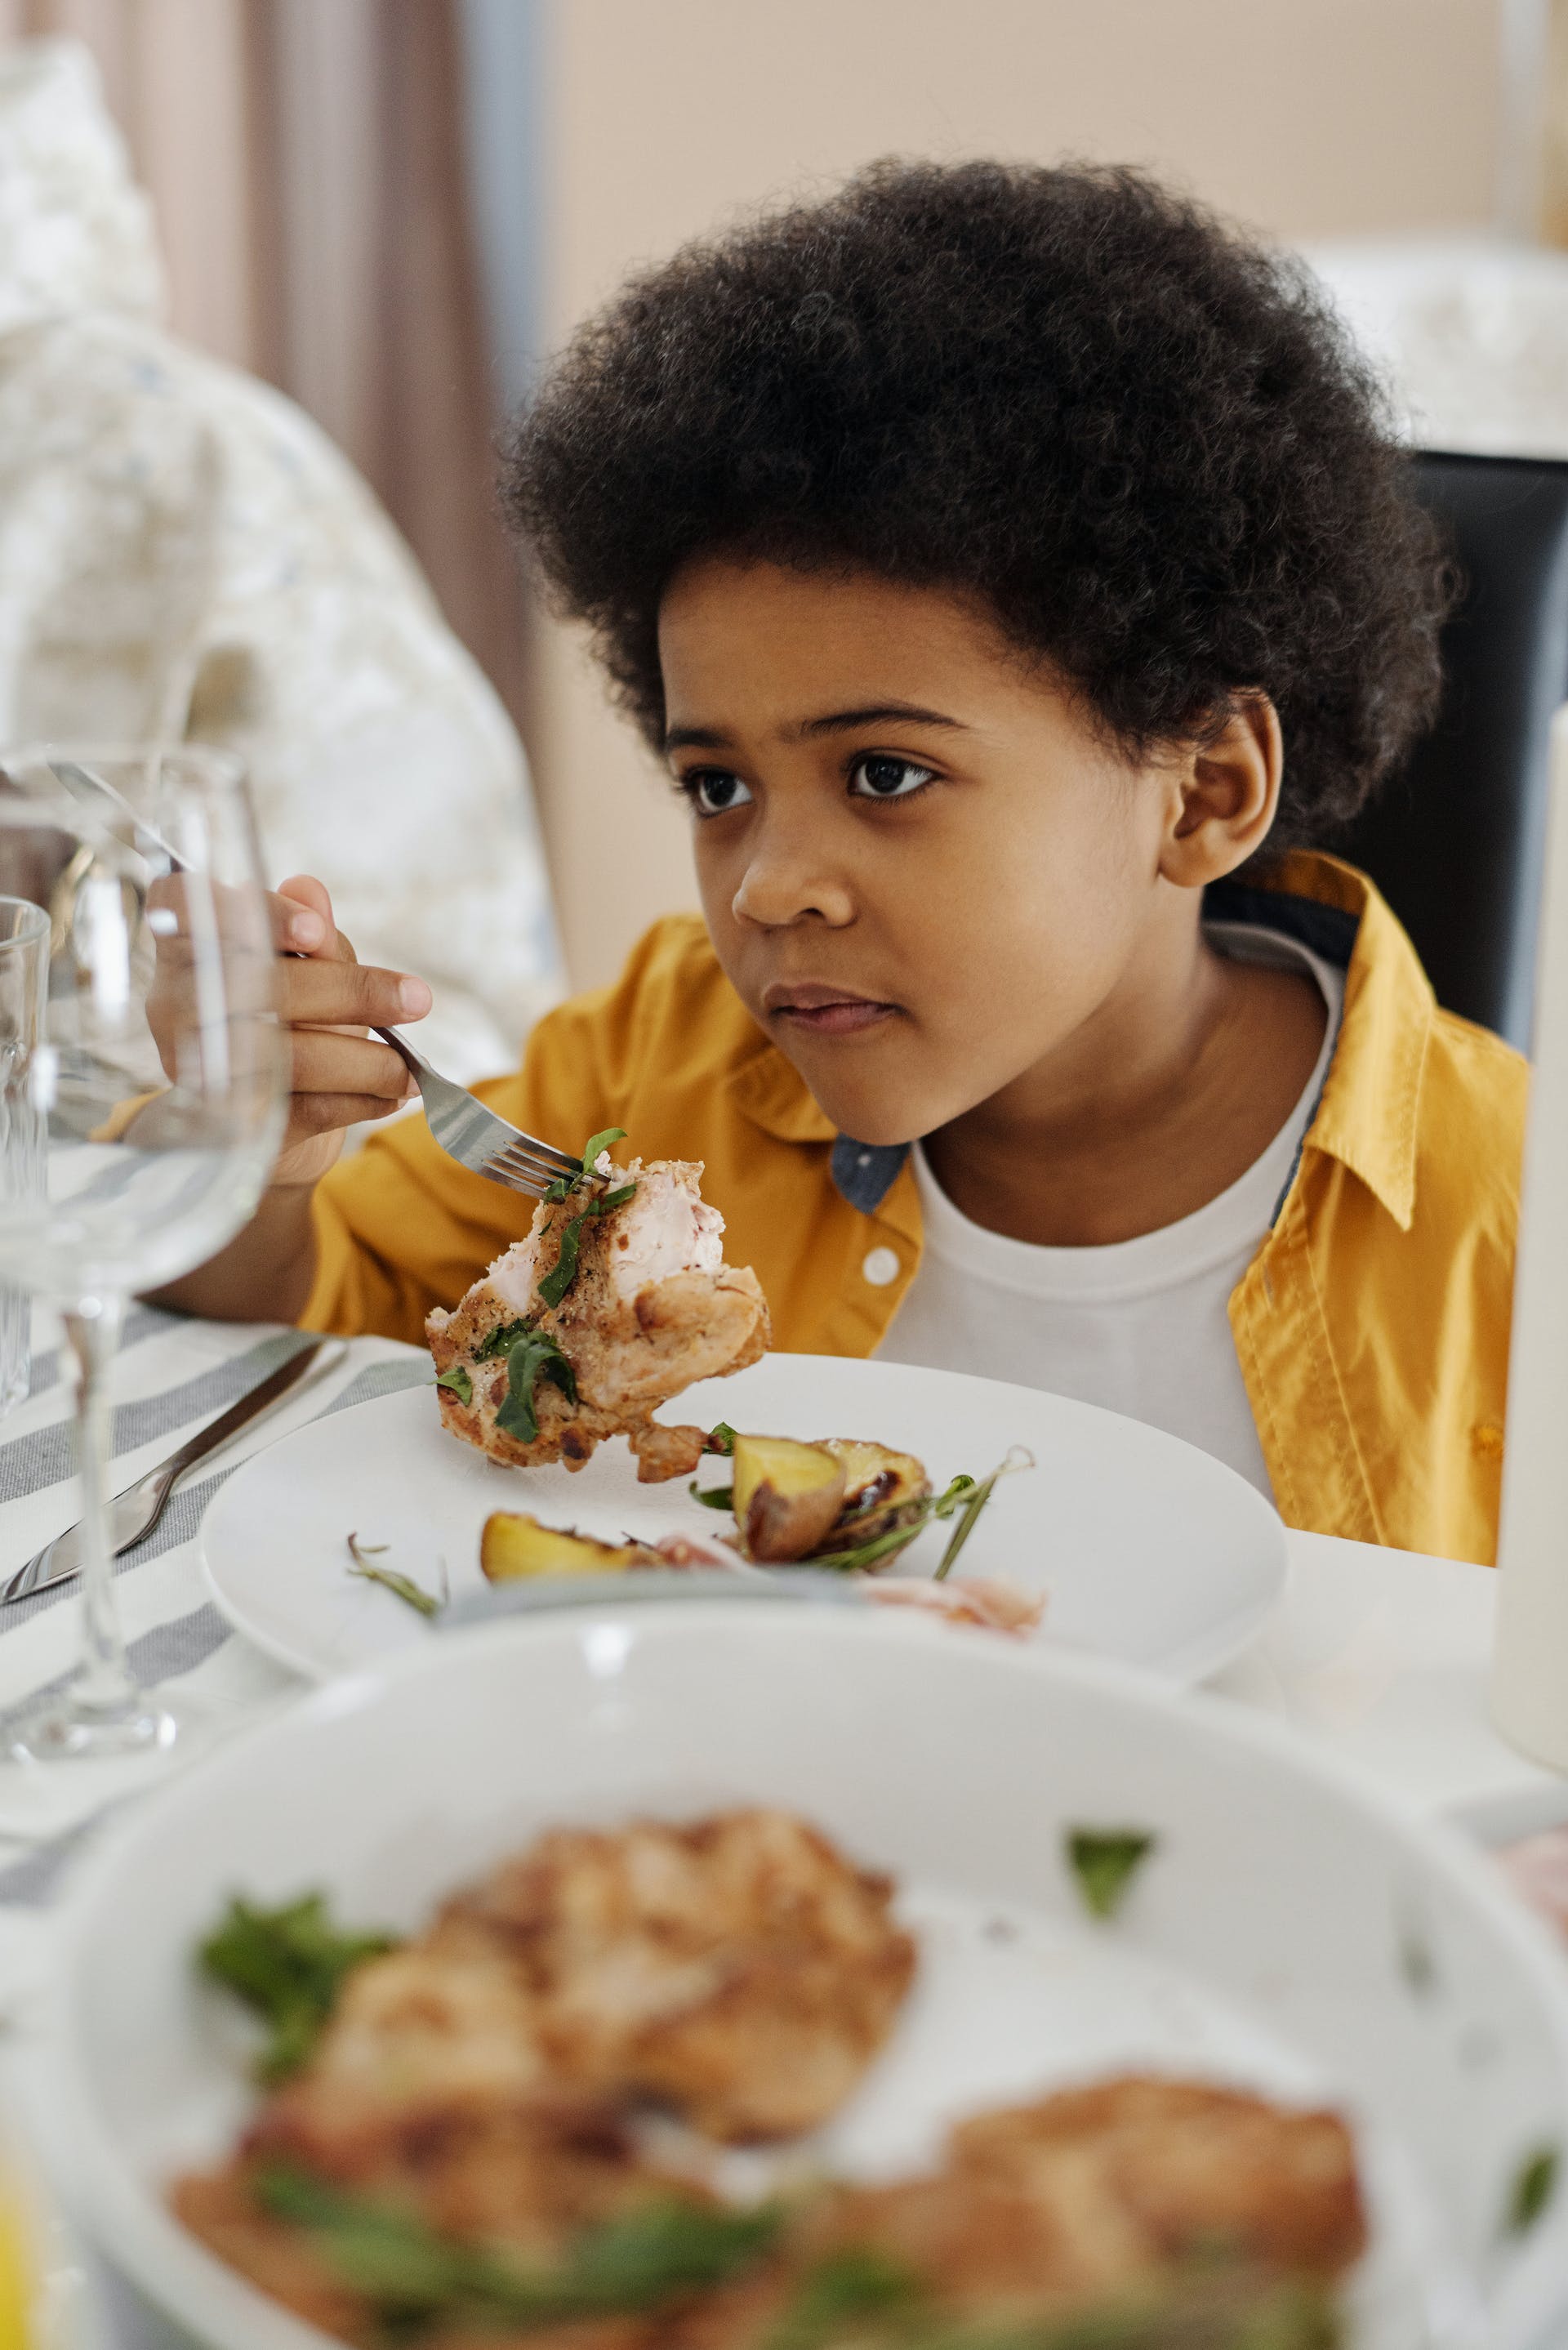 A child eating food | Source: Pexels